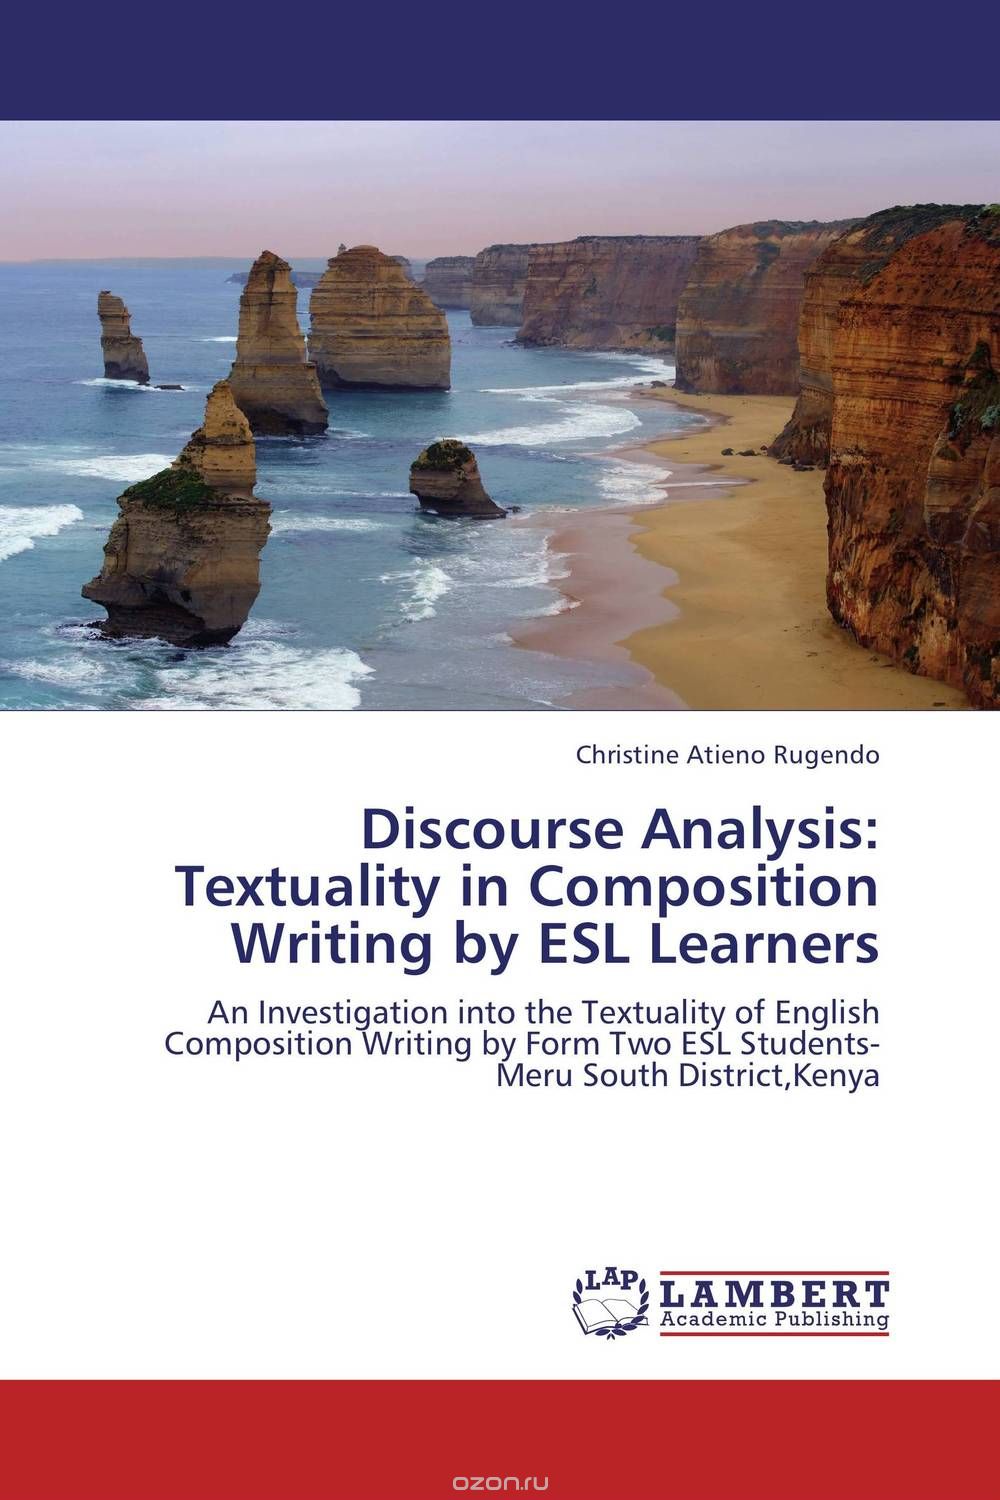 Скачать книгу "Discourse Analysis: Textuality in Composition Writing by ESL Learners"